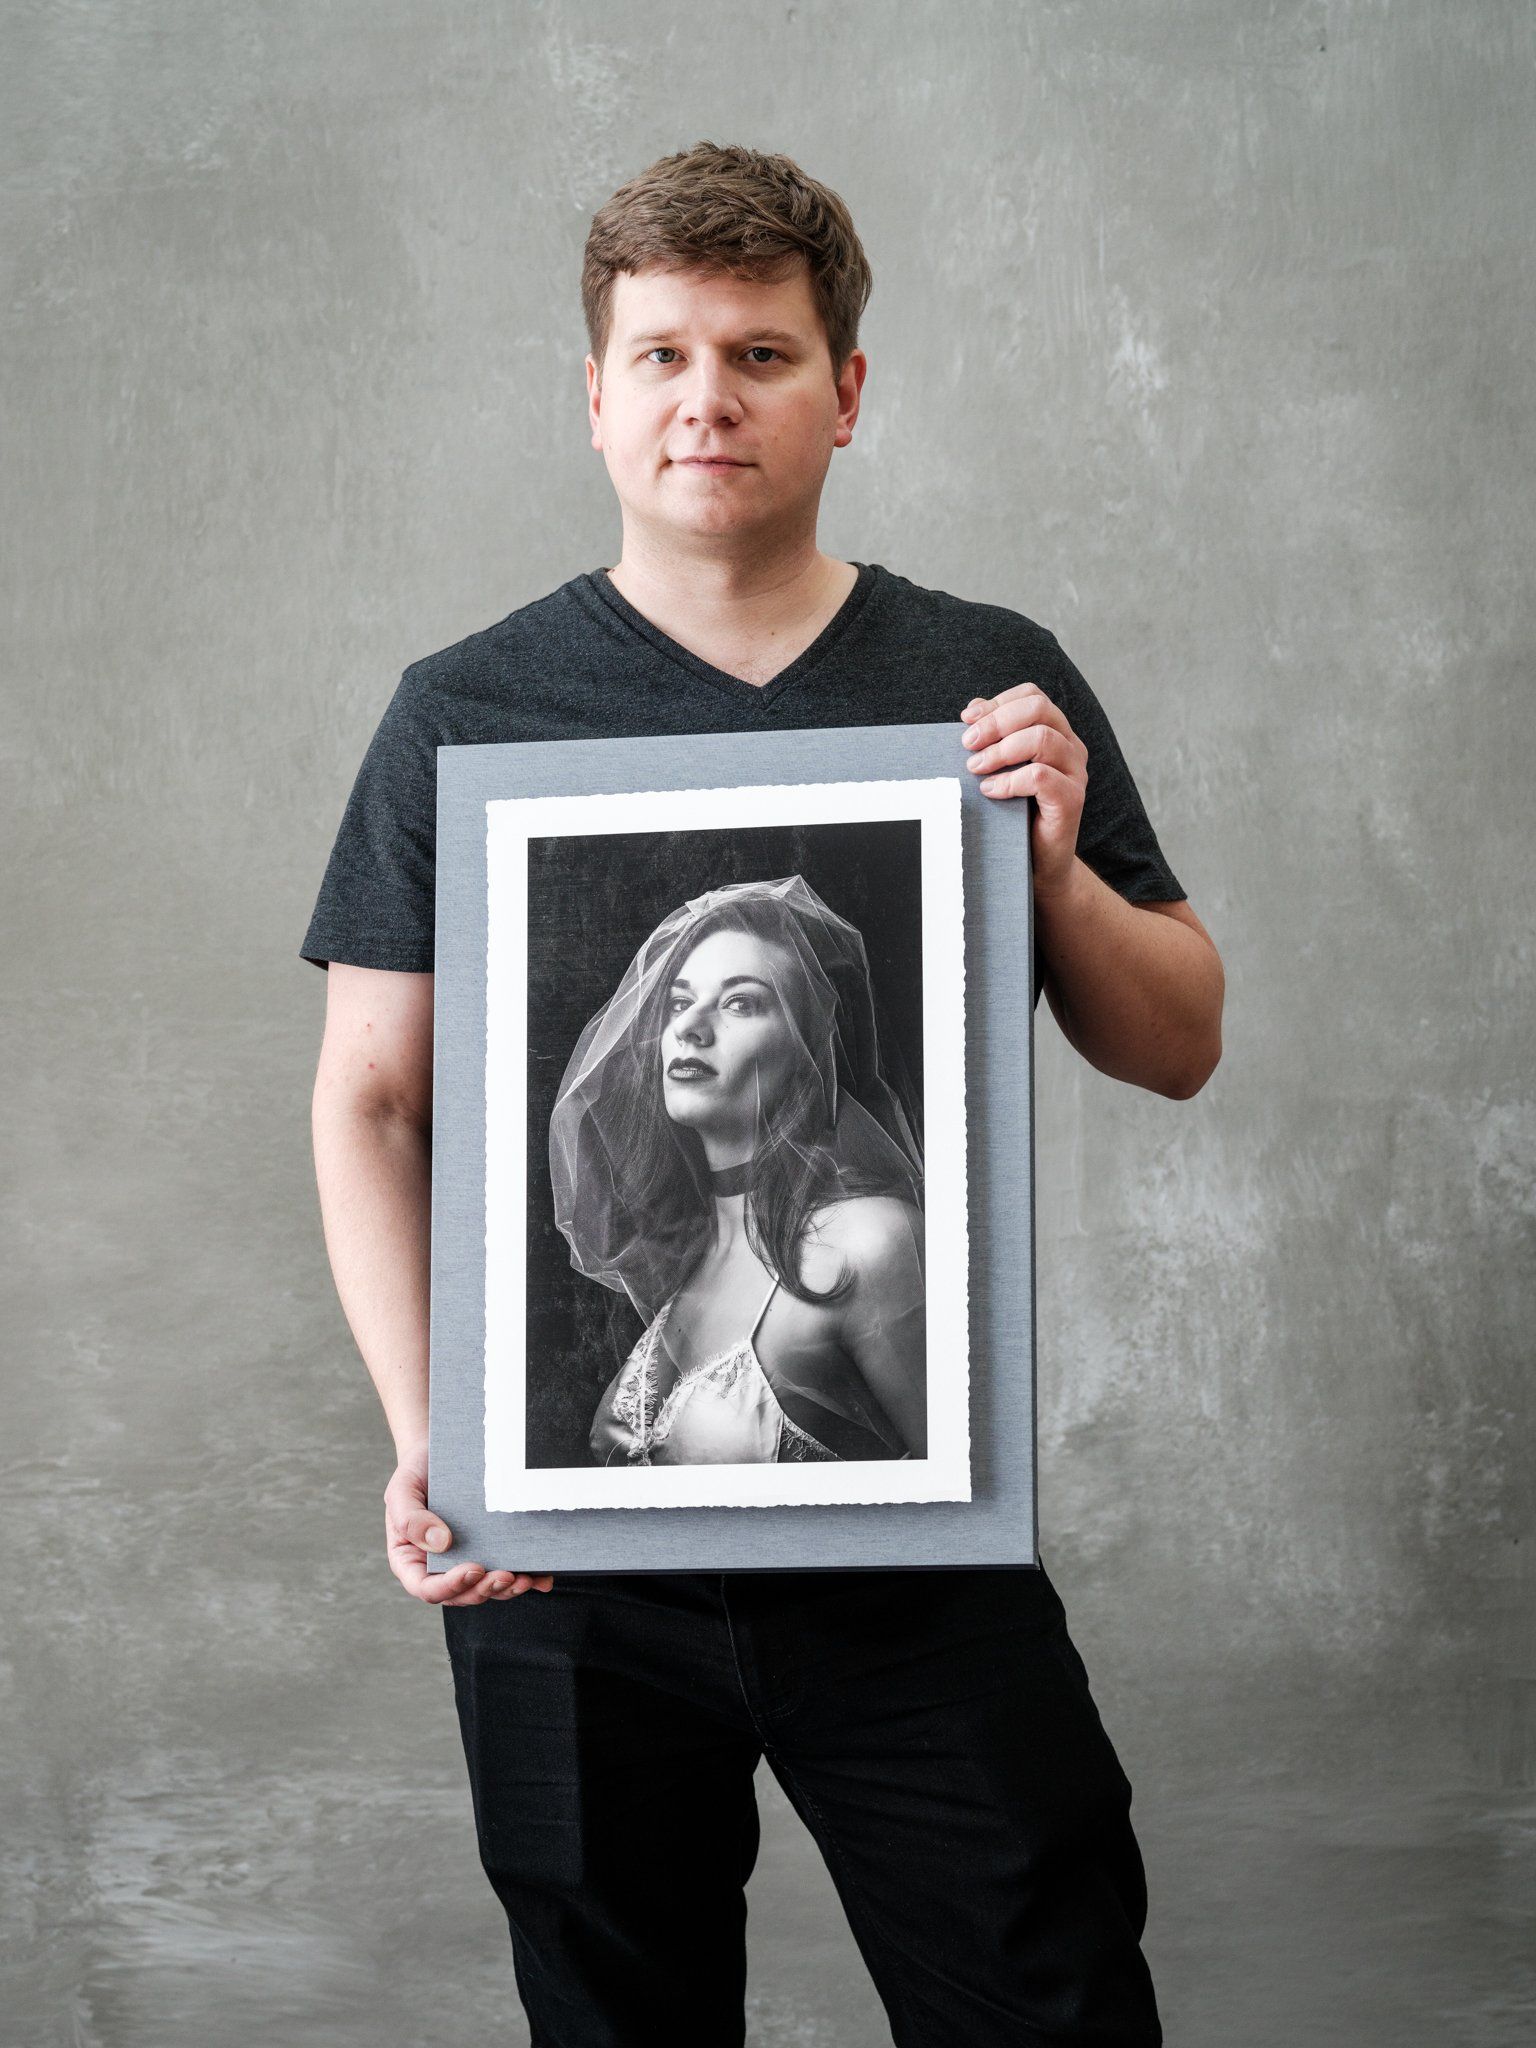 A man holding a framed photo of a woman